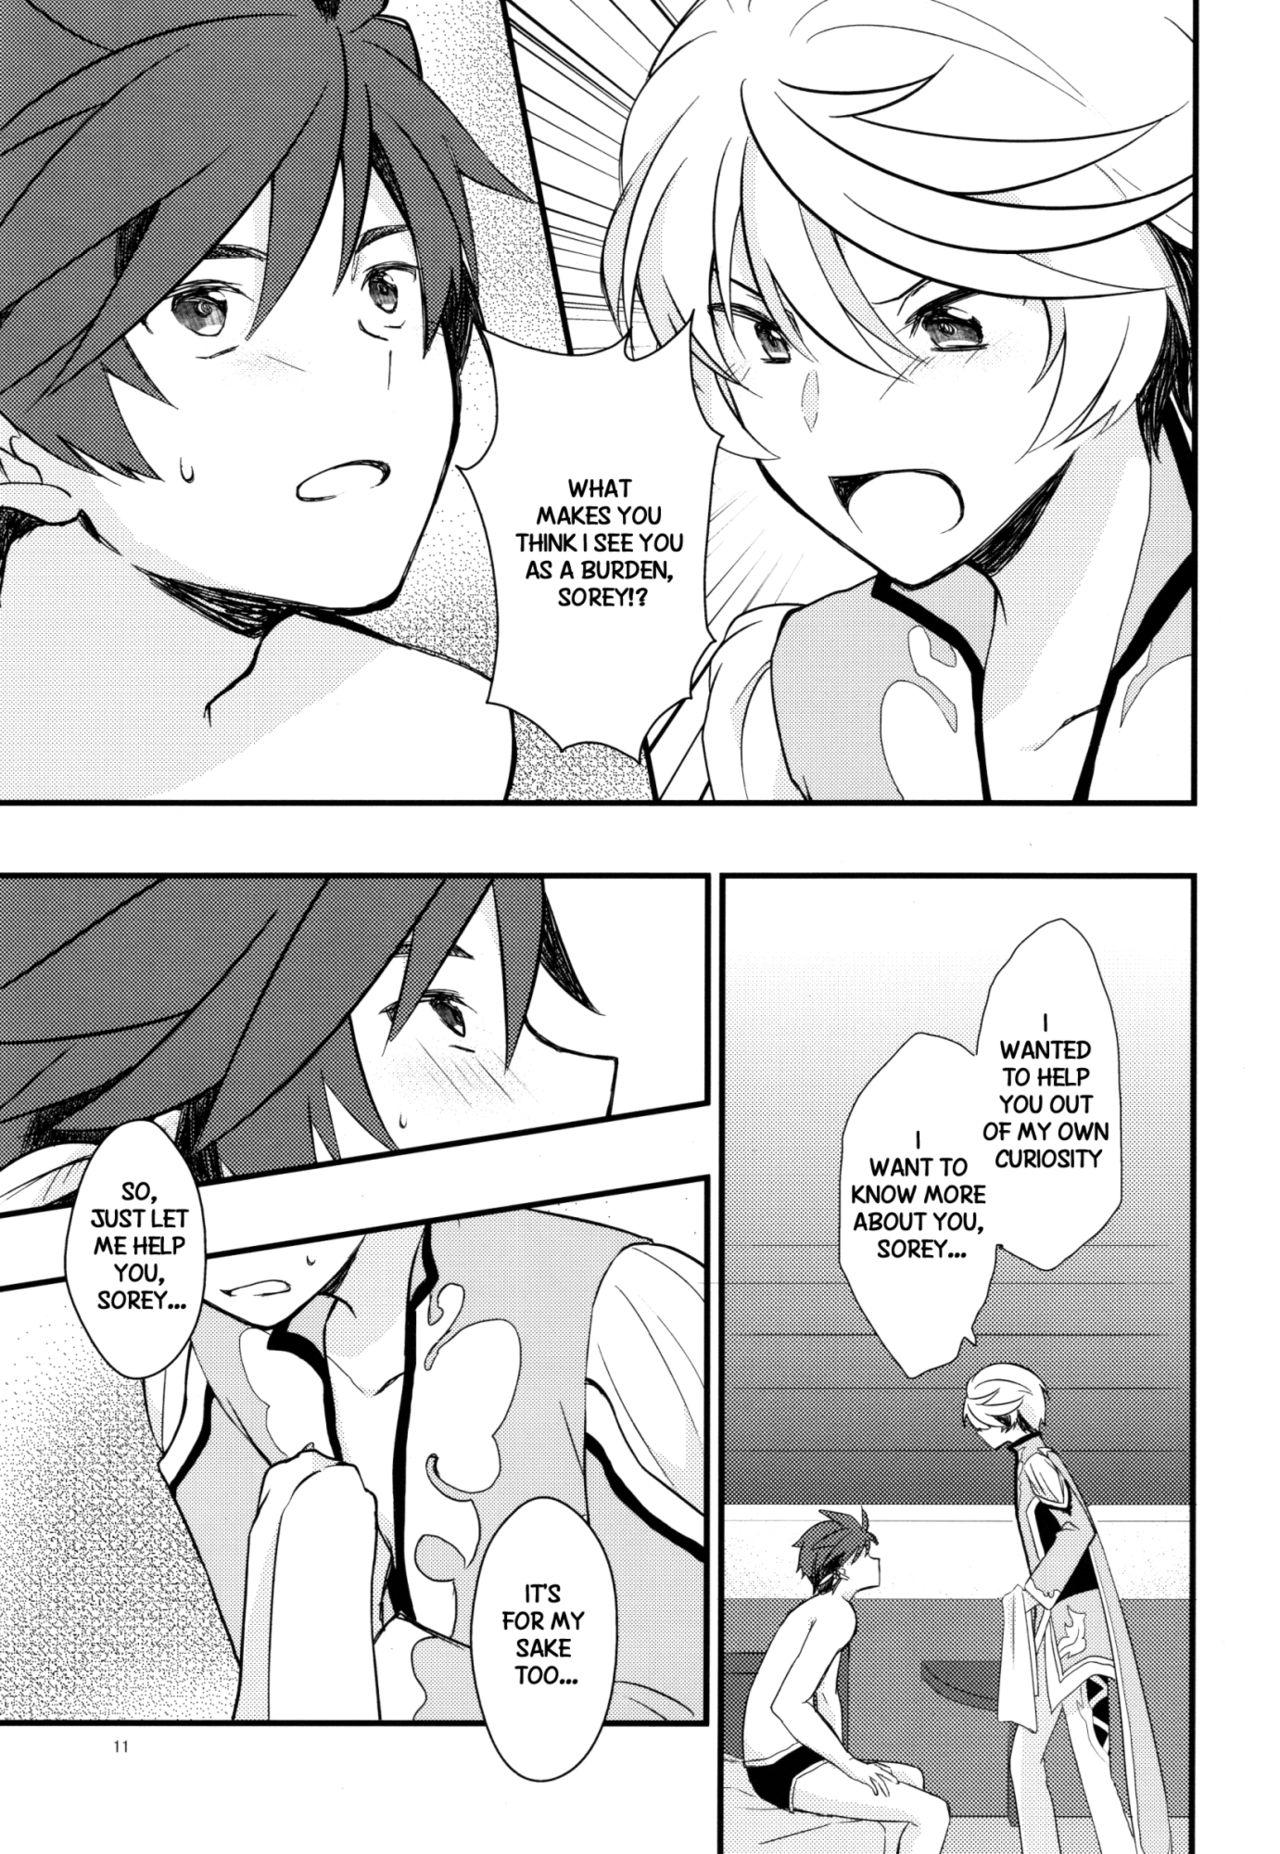 Muscular Sonna no Tokkuni, - Tales of zestiria Style - Page 10